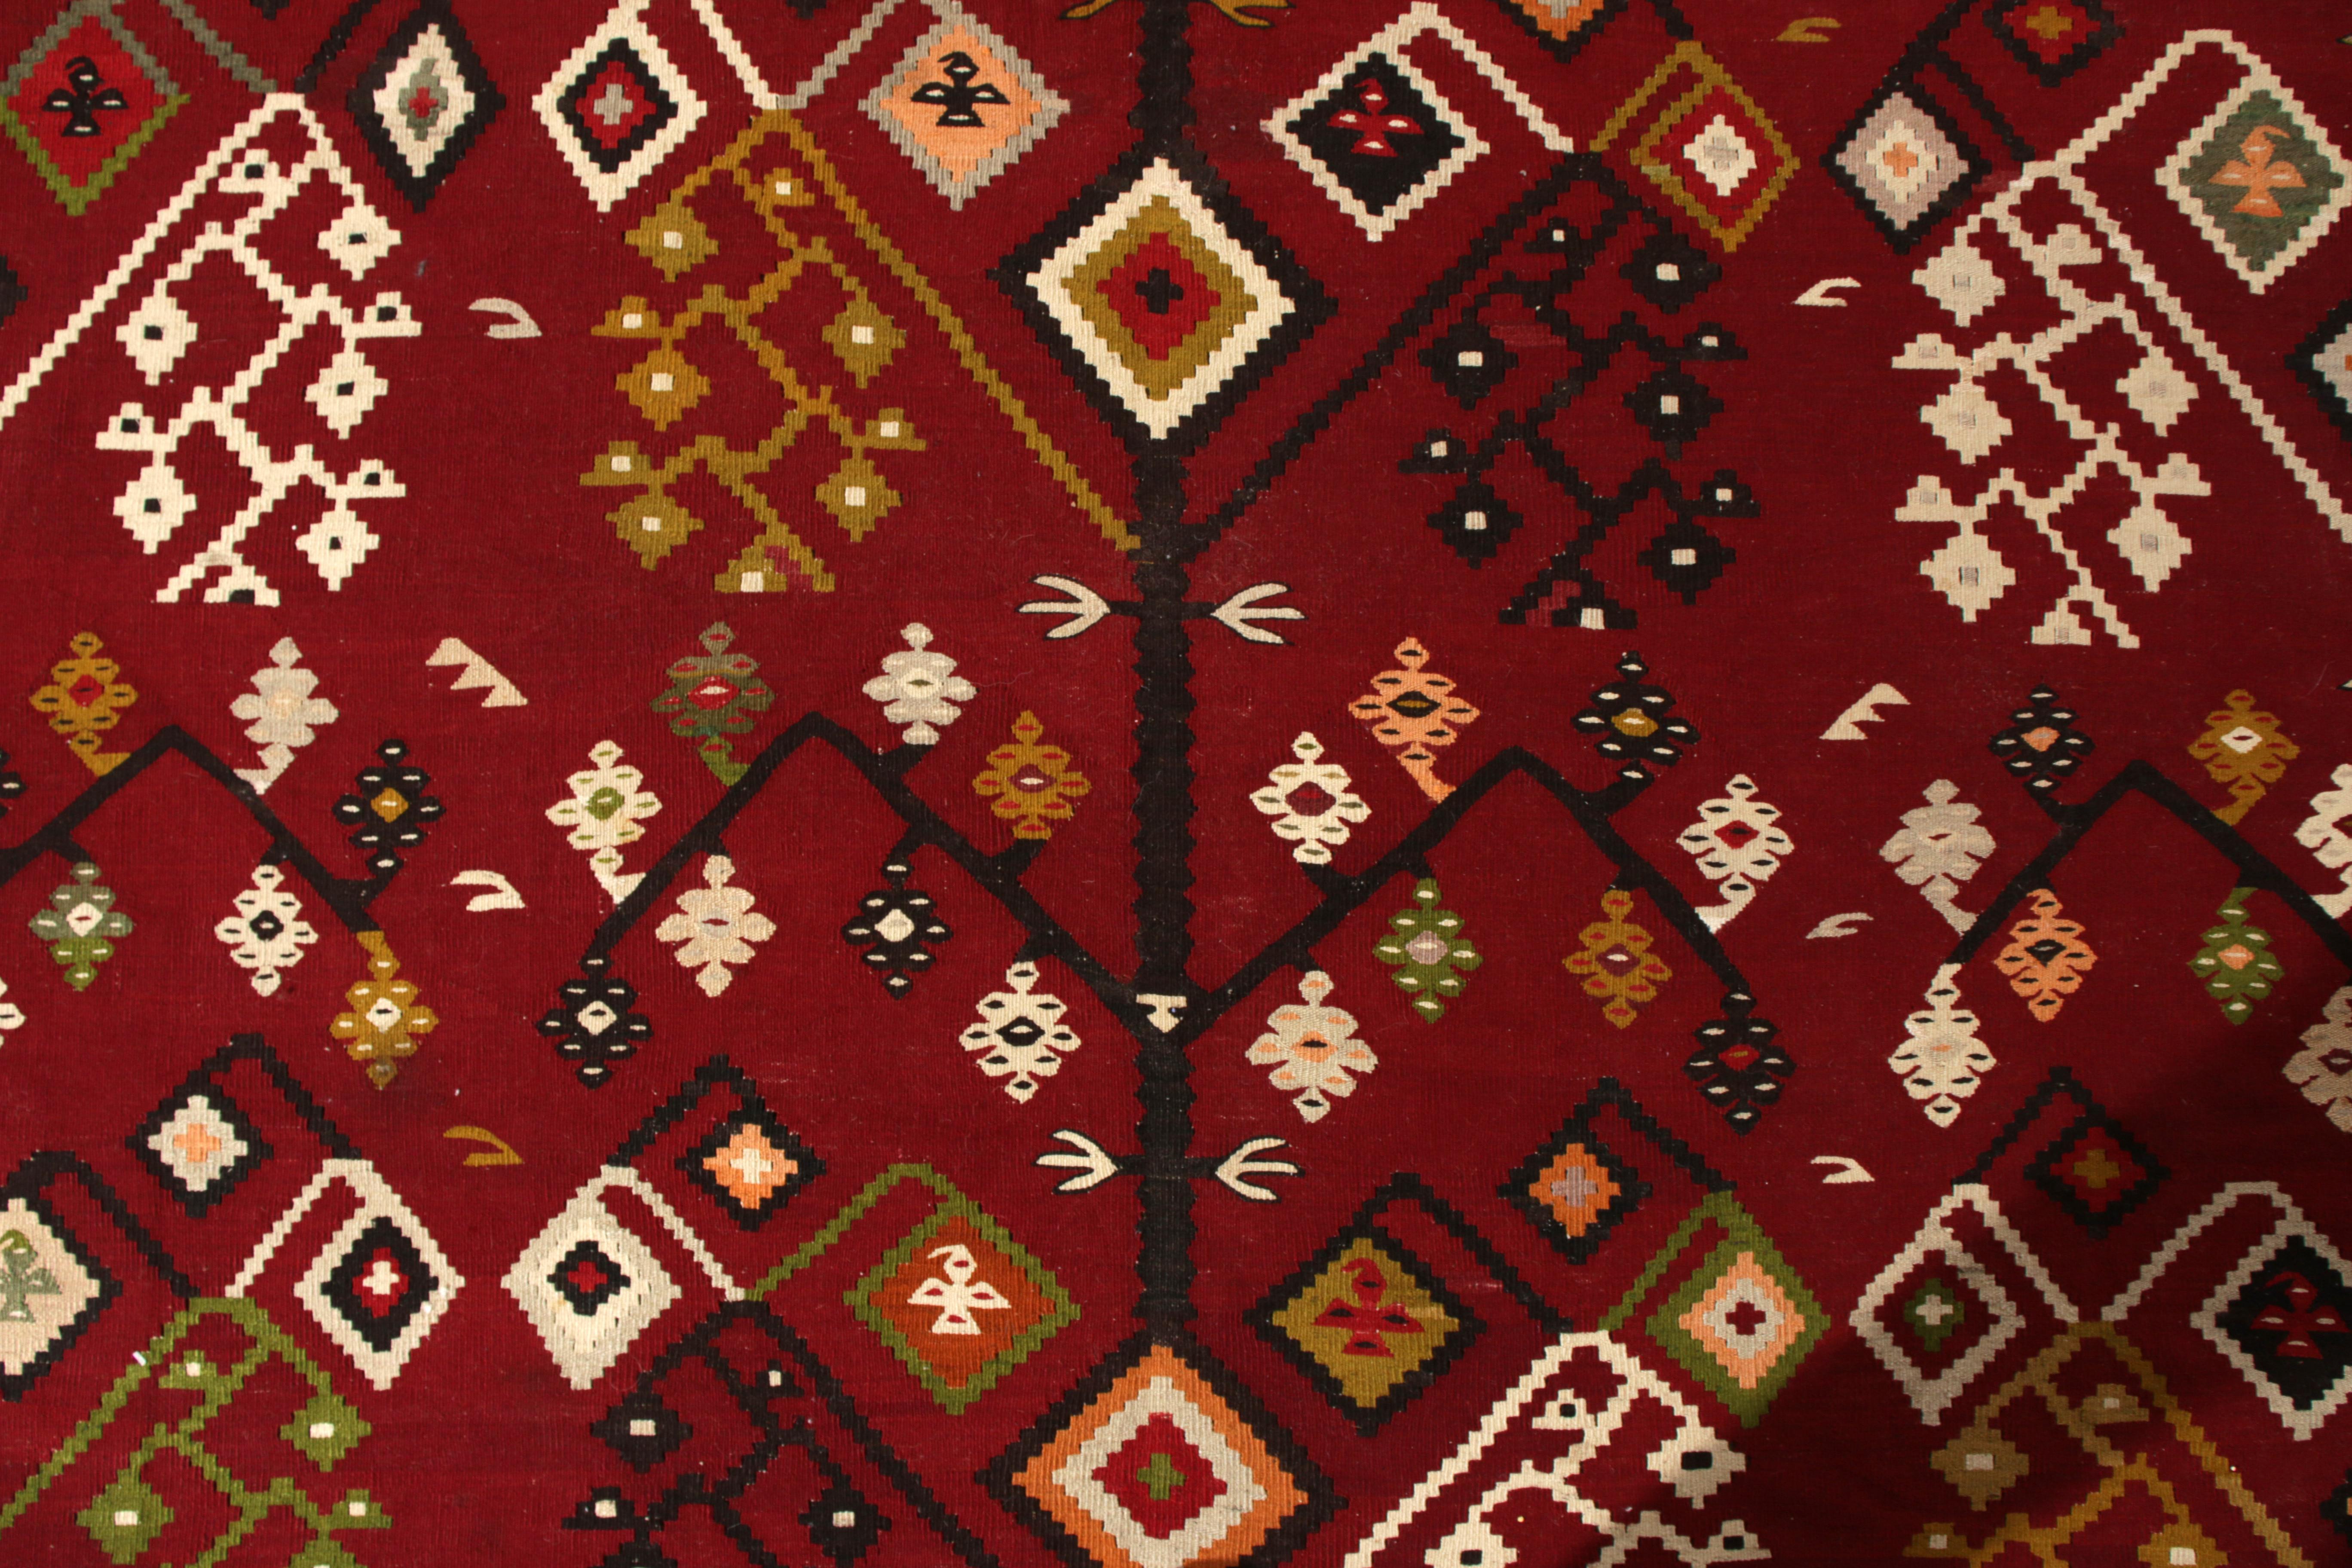 Turkish Handwoven Vintage Kilim Rug in Red and Gold Geometric Pattern by Rug & Kilim For Sale